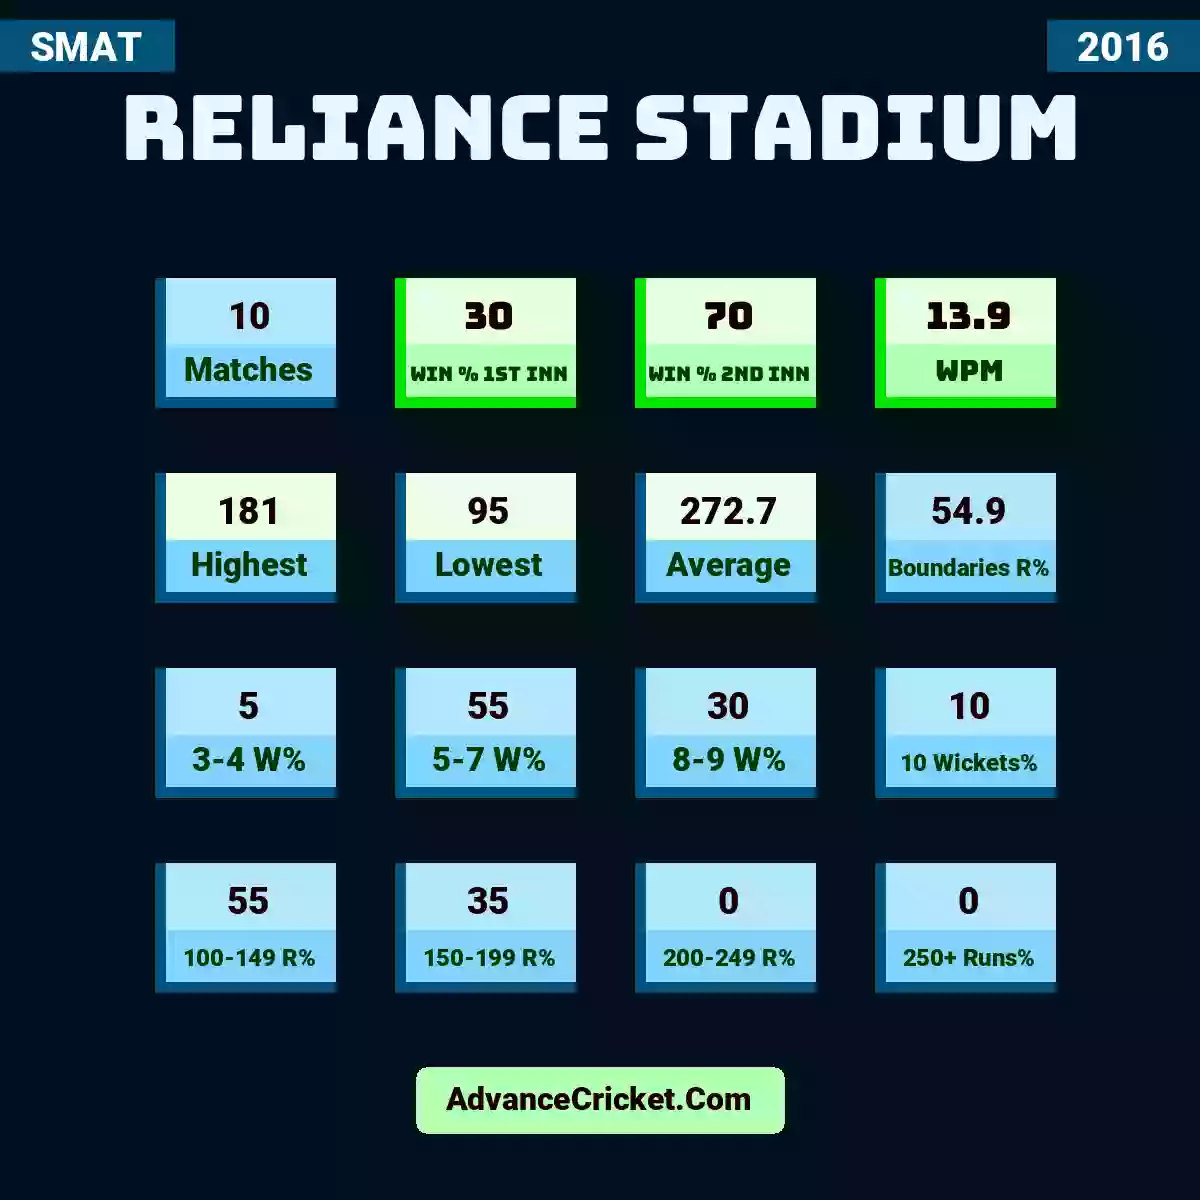 Image showing Reliance Stadium with Matches: 10, Win % 1st Inn: 30, Win % 2nd Inn: 70, WPM: 13.9, Highest: 181, Lowest: 95, Average: 272.7, Boundaries R%: 54.9, 3-4 W%: 5, 5-7 W%: 55, 8-9 W%: 30, 10 Wickets%: 10, 100-149 R%: 55, 150-199 R%: 35, 200-249 R%: 0, 250+ Runs%: 0.